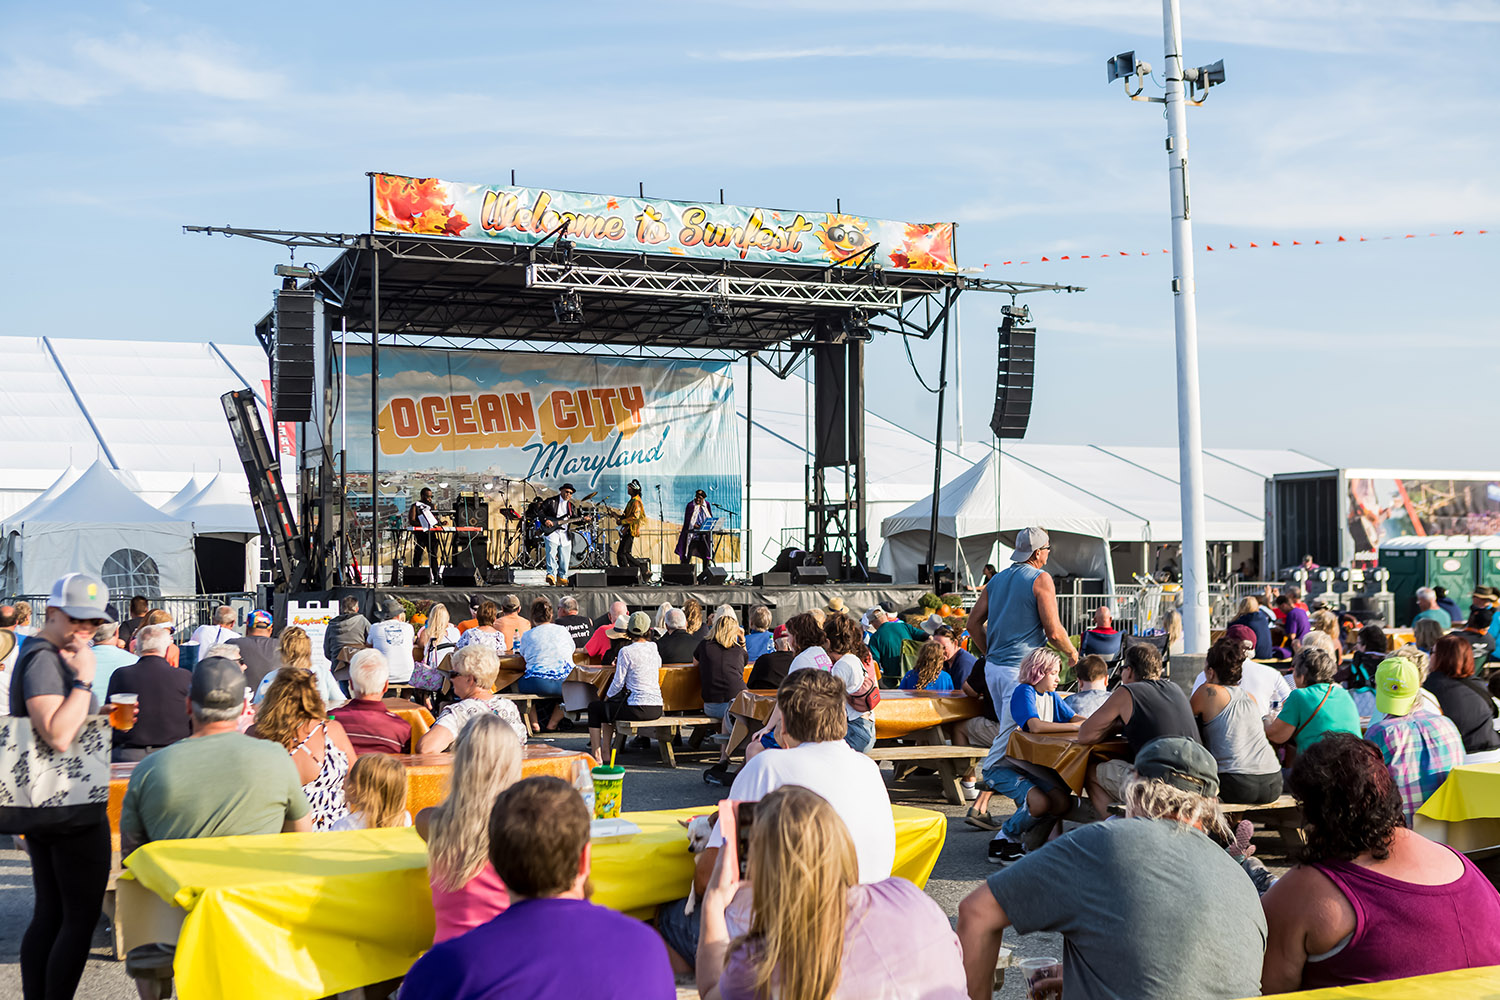 Logistics issues with other big events could push Sunfest again in October